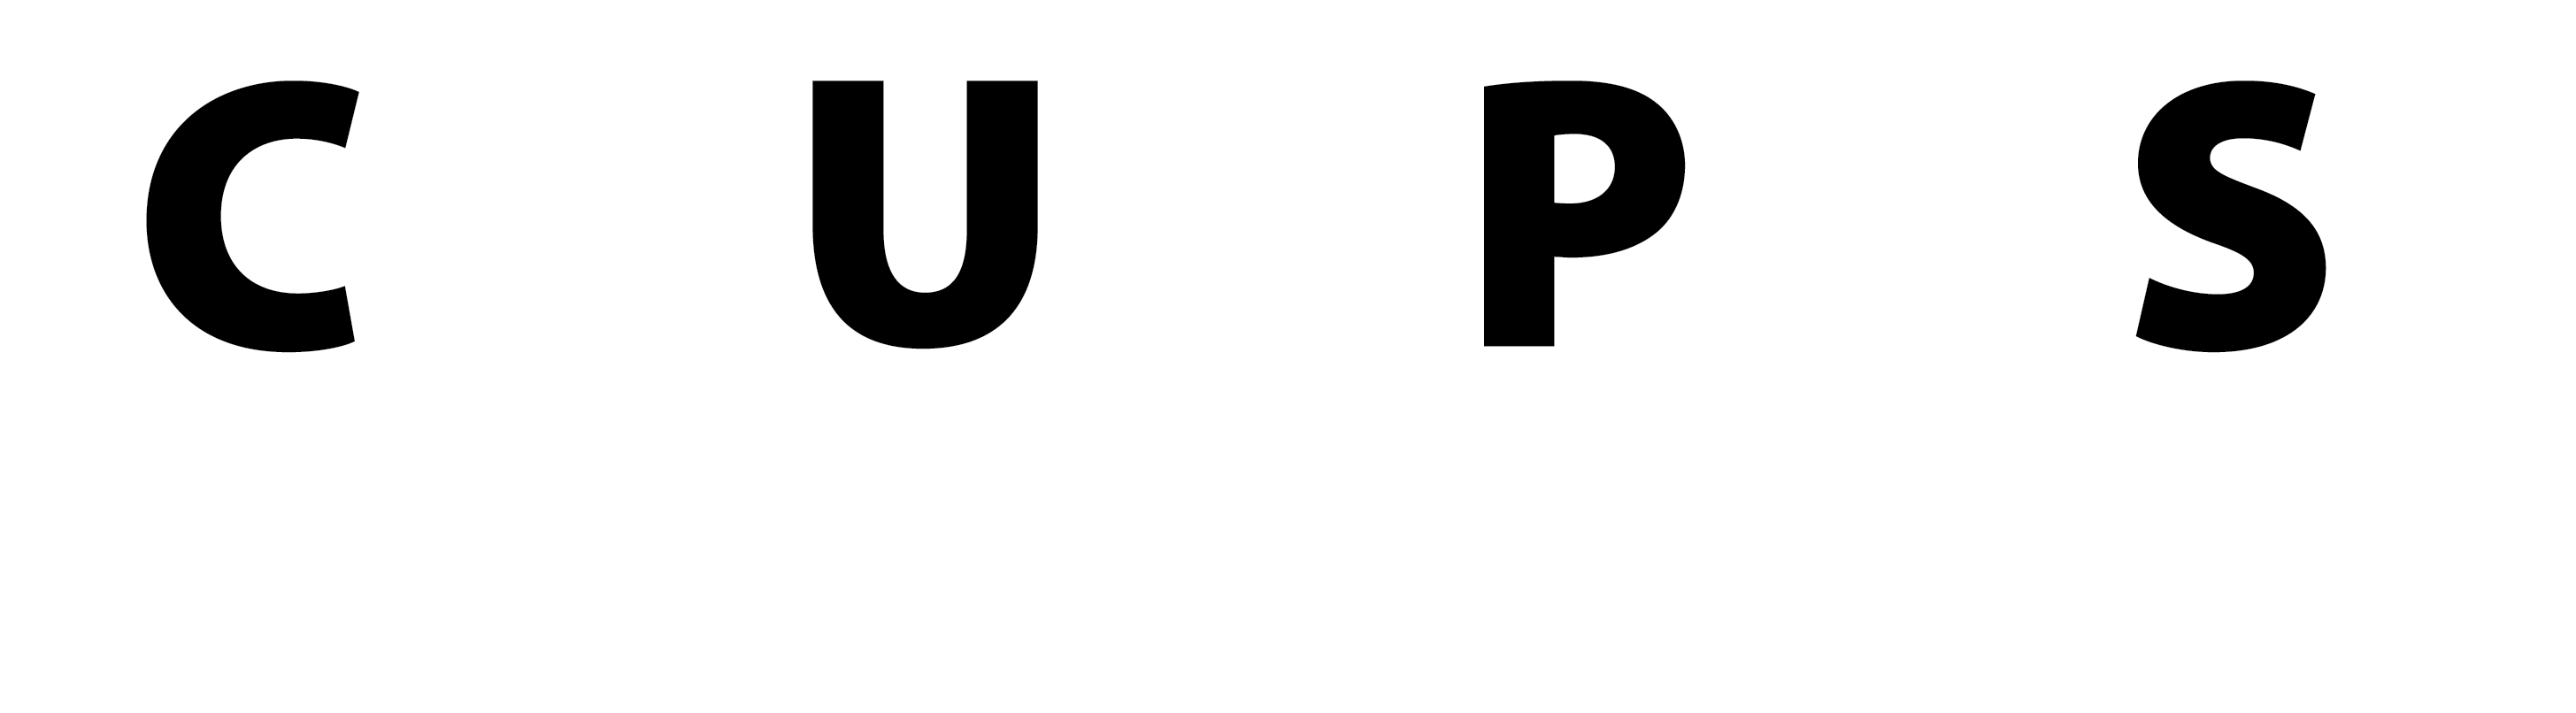 Cylab Usable Privacy and Security